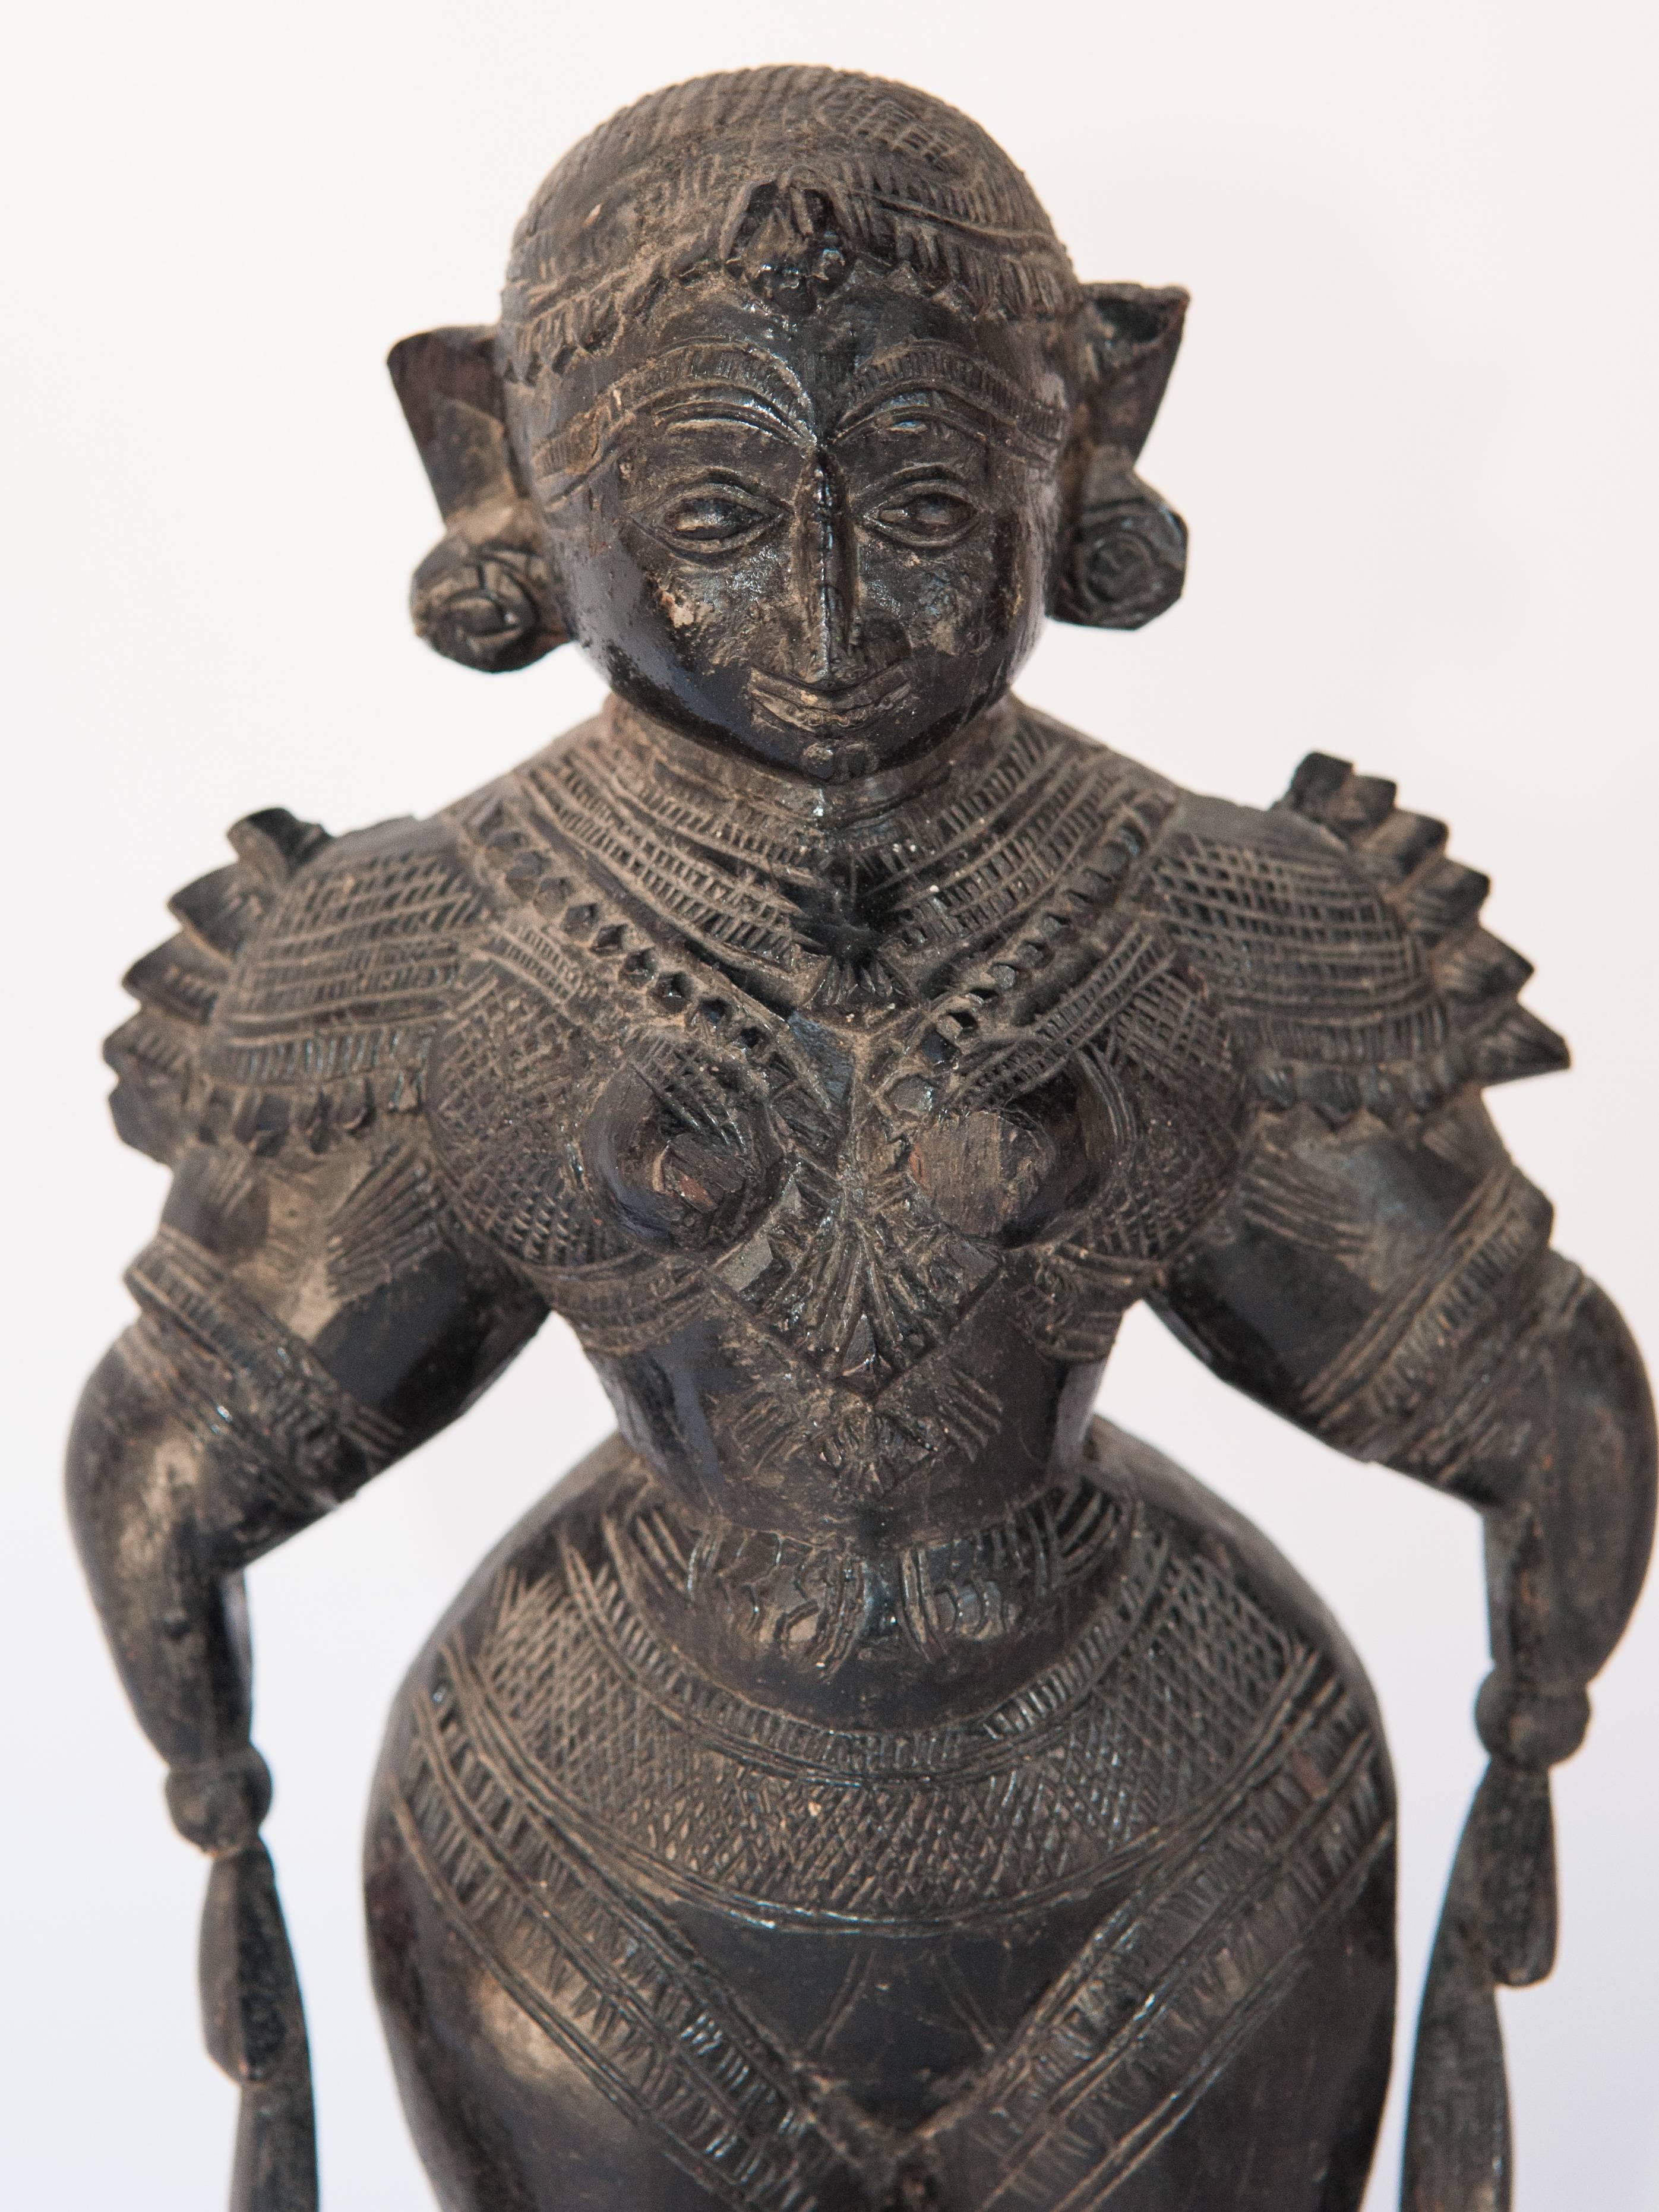 Wood Marapachi doll from Tamil Nadu, mid-20th century, hand-carved and blackened.
Offered by Bruce Hughes.
In the southern Indian state of Tamil Nadu parents present their daughter a pair of dolls, Marapachi Bommai, literally wooden dolls, on the